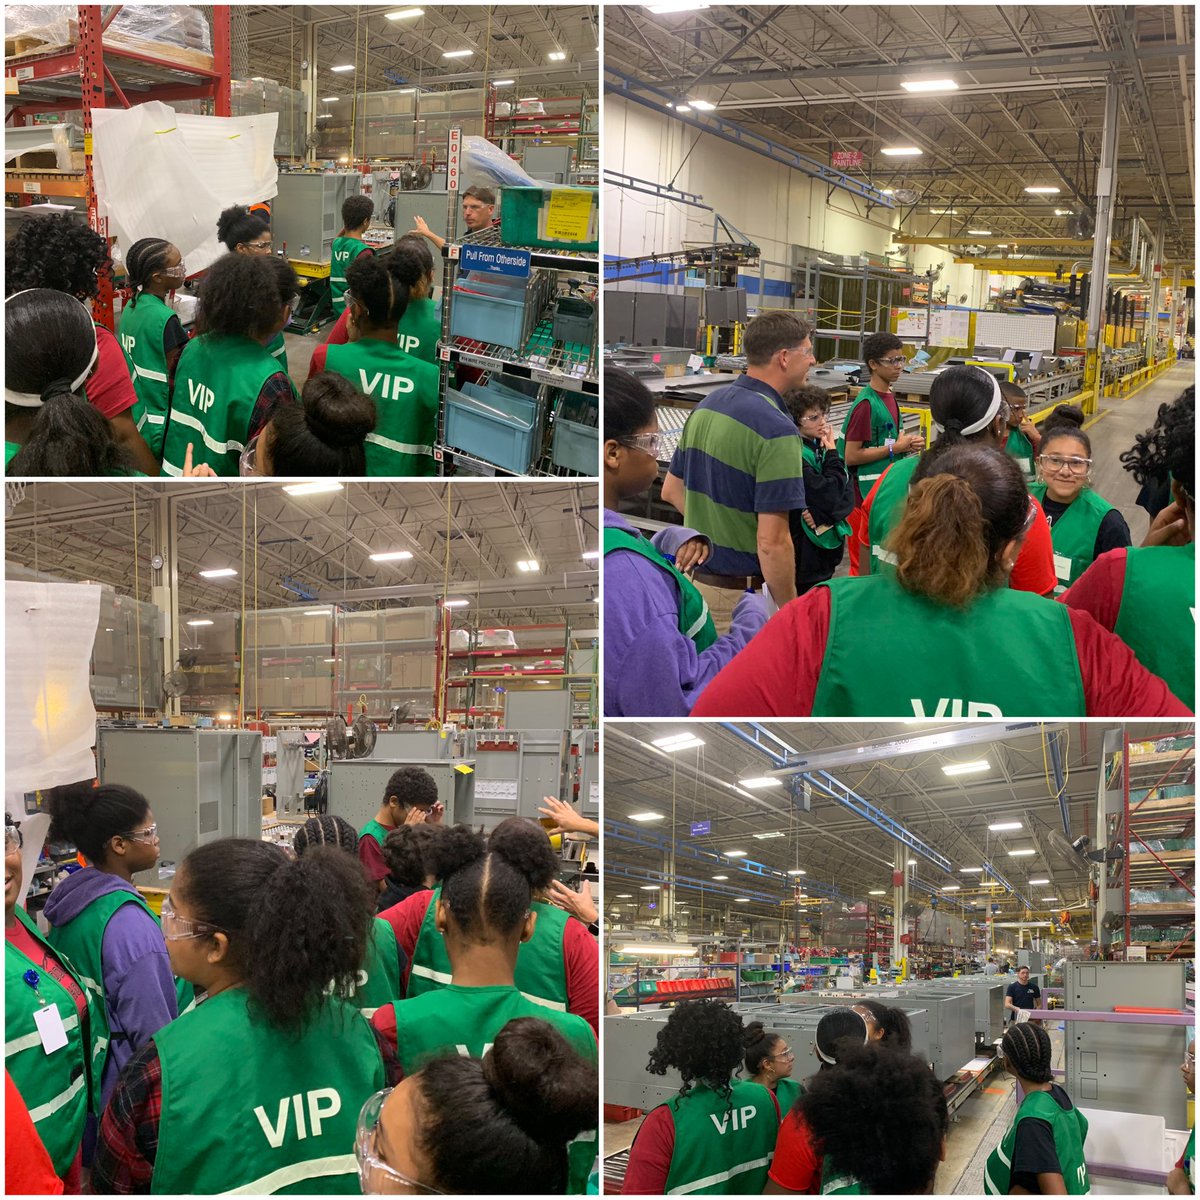 Another day, another visit to one of Asheville’s largest employers. Thank you @eatoncorp for welcoming AMS students in your facility! Students were excited to learn about the numerous job opportunities that exist in their own community. #MSM19 #CougarPride #theACSway